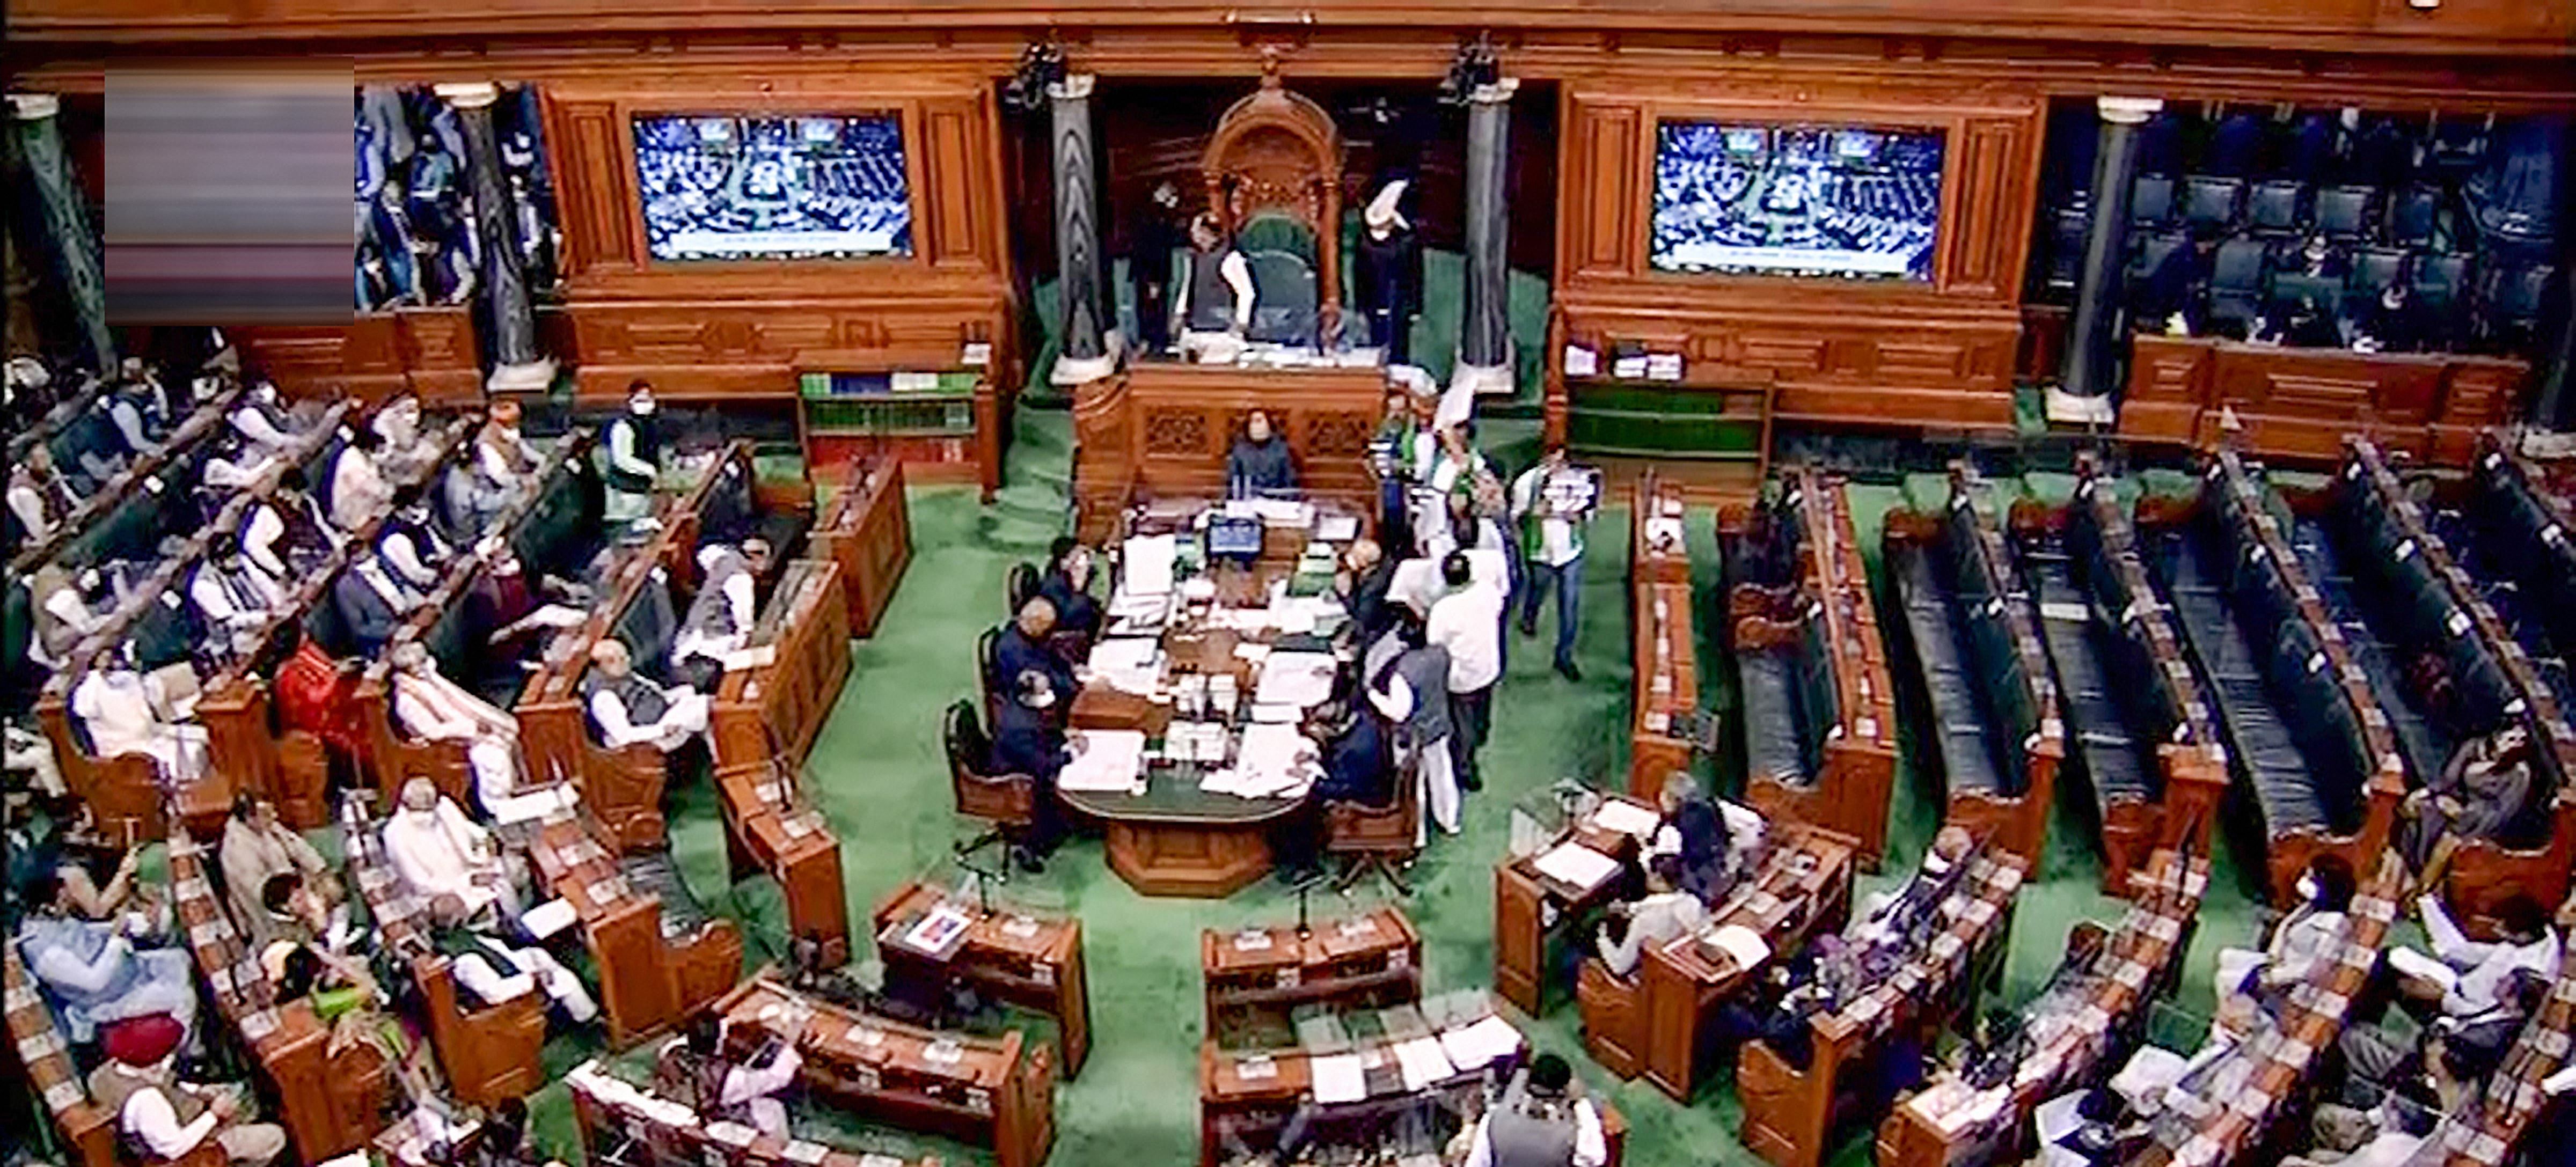 "We have decided to oppose the way democracy has been tattered in Rajya Sabha by suspending 12 MPs. We have decided to oppose such  dictatorial attitude of the government," Adhir Ranjan Chowdhury, Congress leader in the Lok Sabha, said after the walkout. Credit: PTI Photo